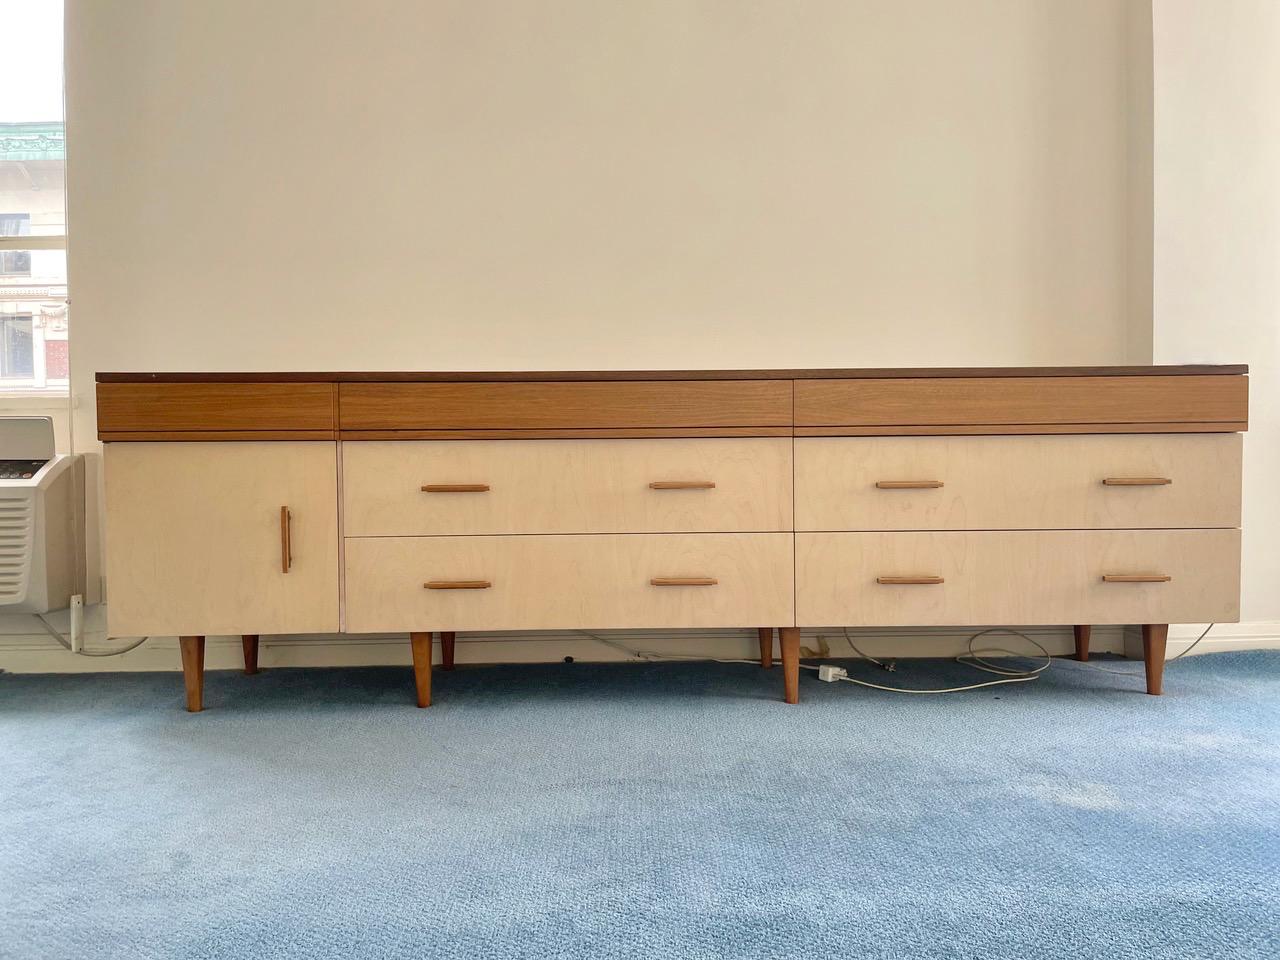 BG GALLERIES SPRING INTO SUMMER SALE

Custom designed and built dresser/chest of drawers by Hans Weiss, New York, 1960 for a an interior design project for a whole apartment.
Top slim drawers with hidden groove for pills are solid walnut. The light